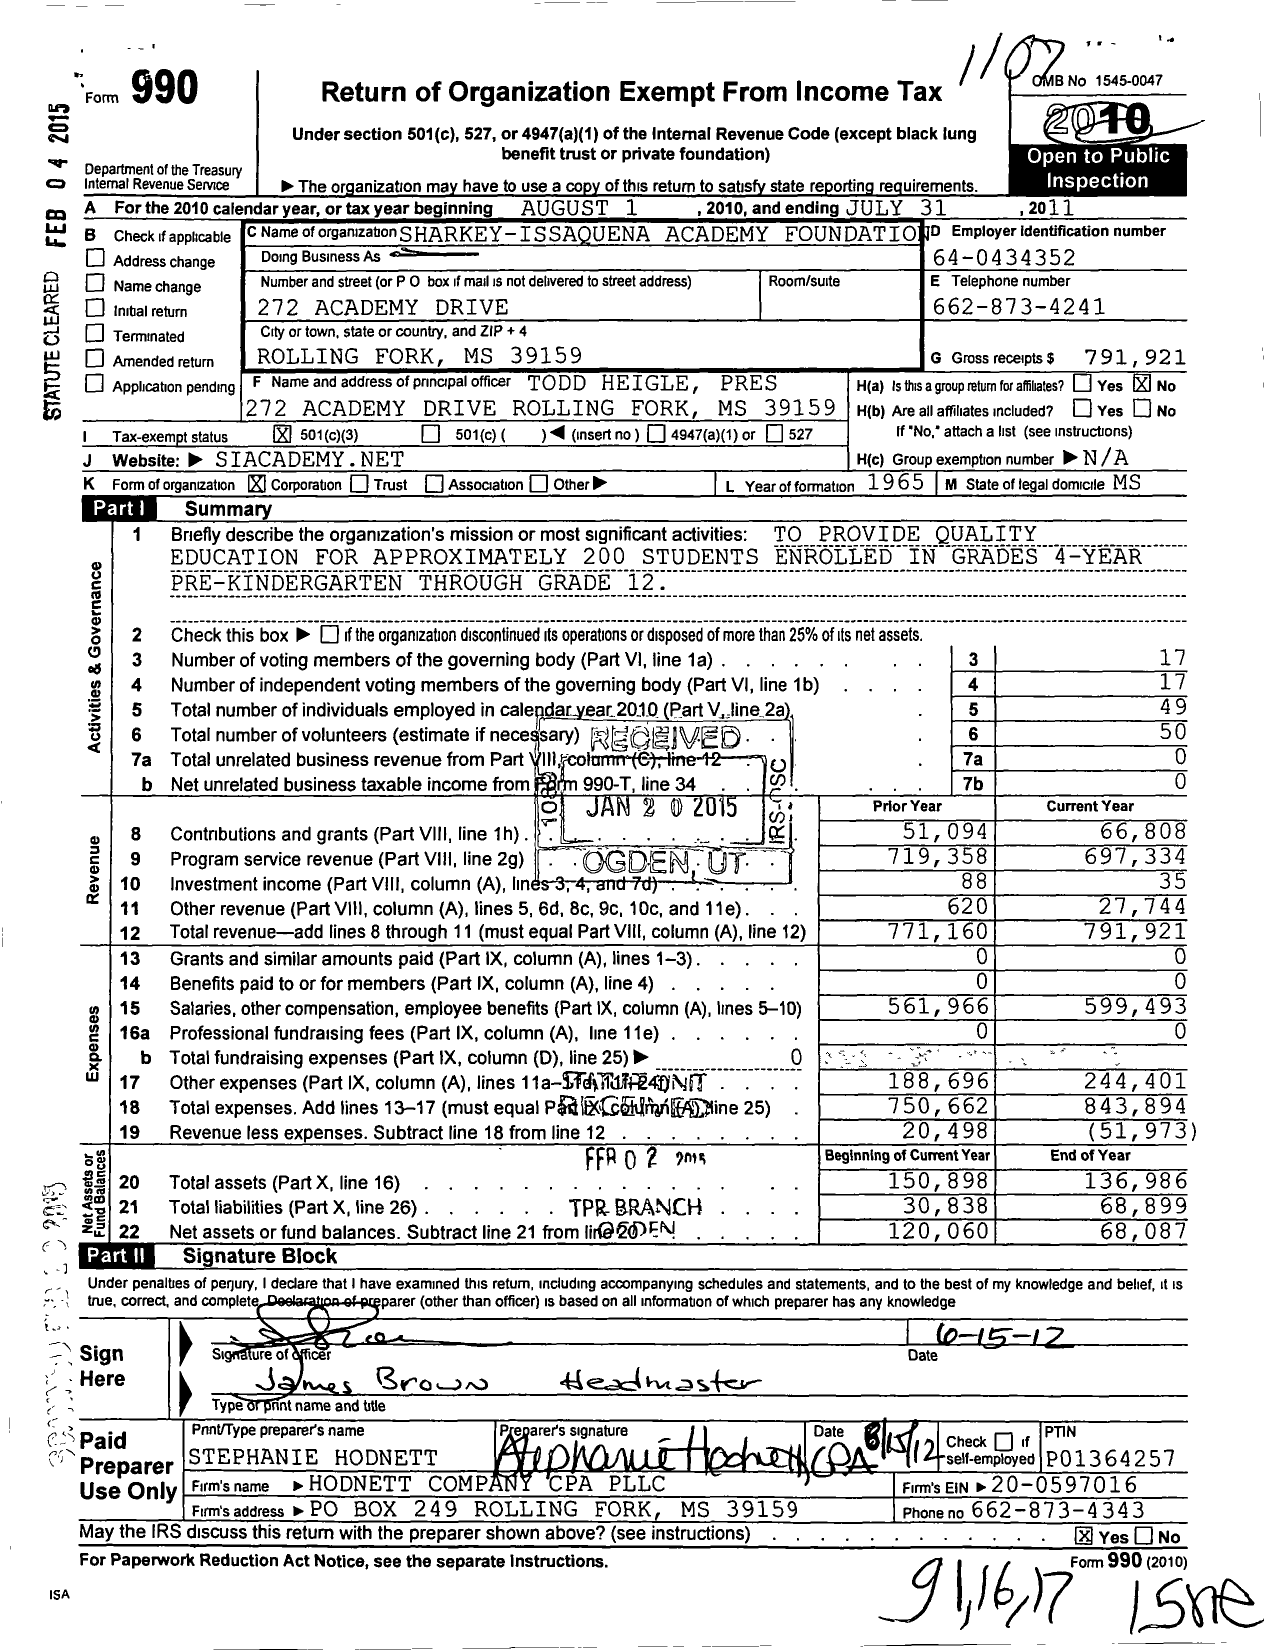 Image of first page of 2010 Form 990 for Sharkey-Issaquena Academy Foundation